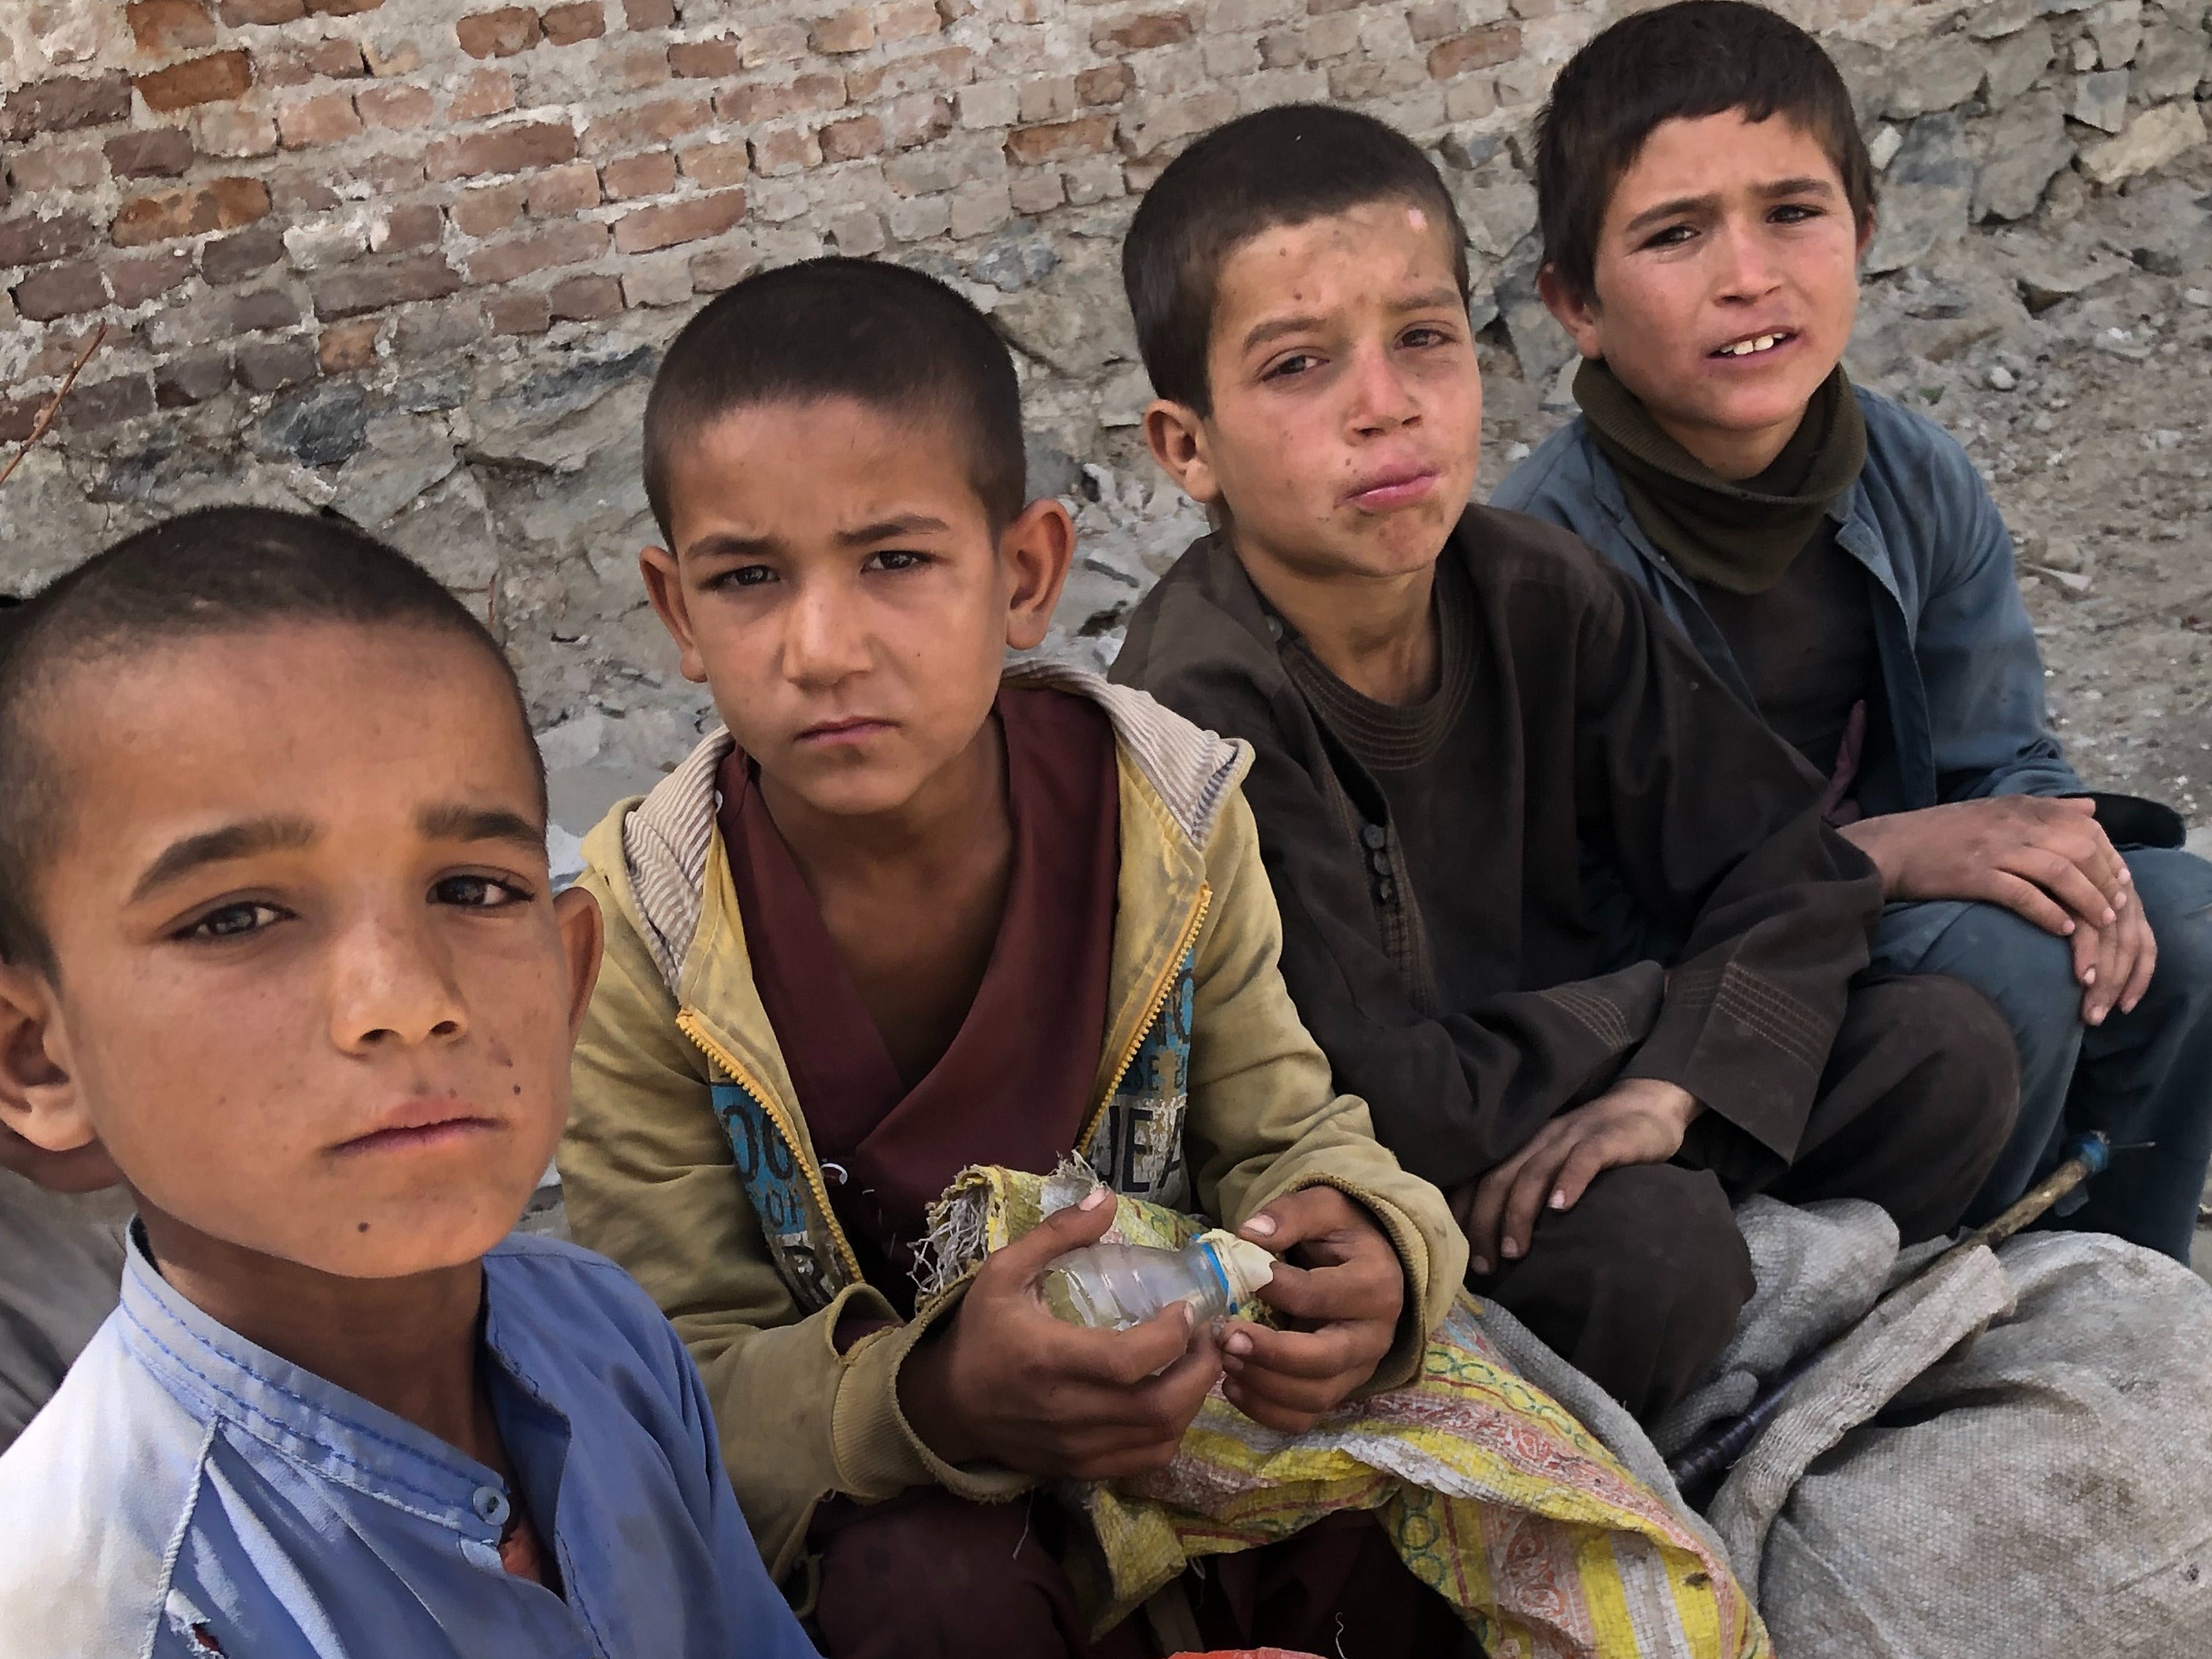 Four young boys take a break from scavenging for cans and bottles in Kabul